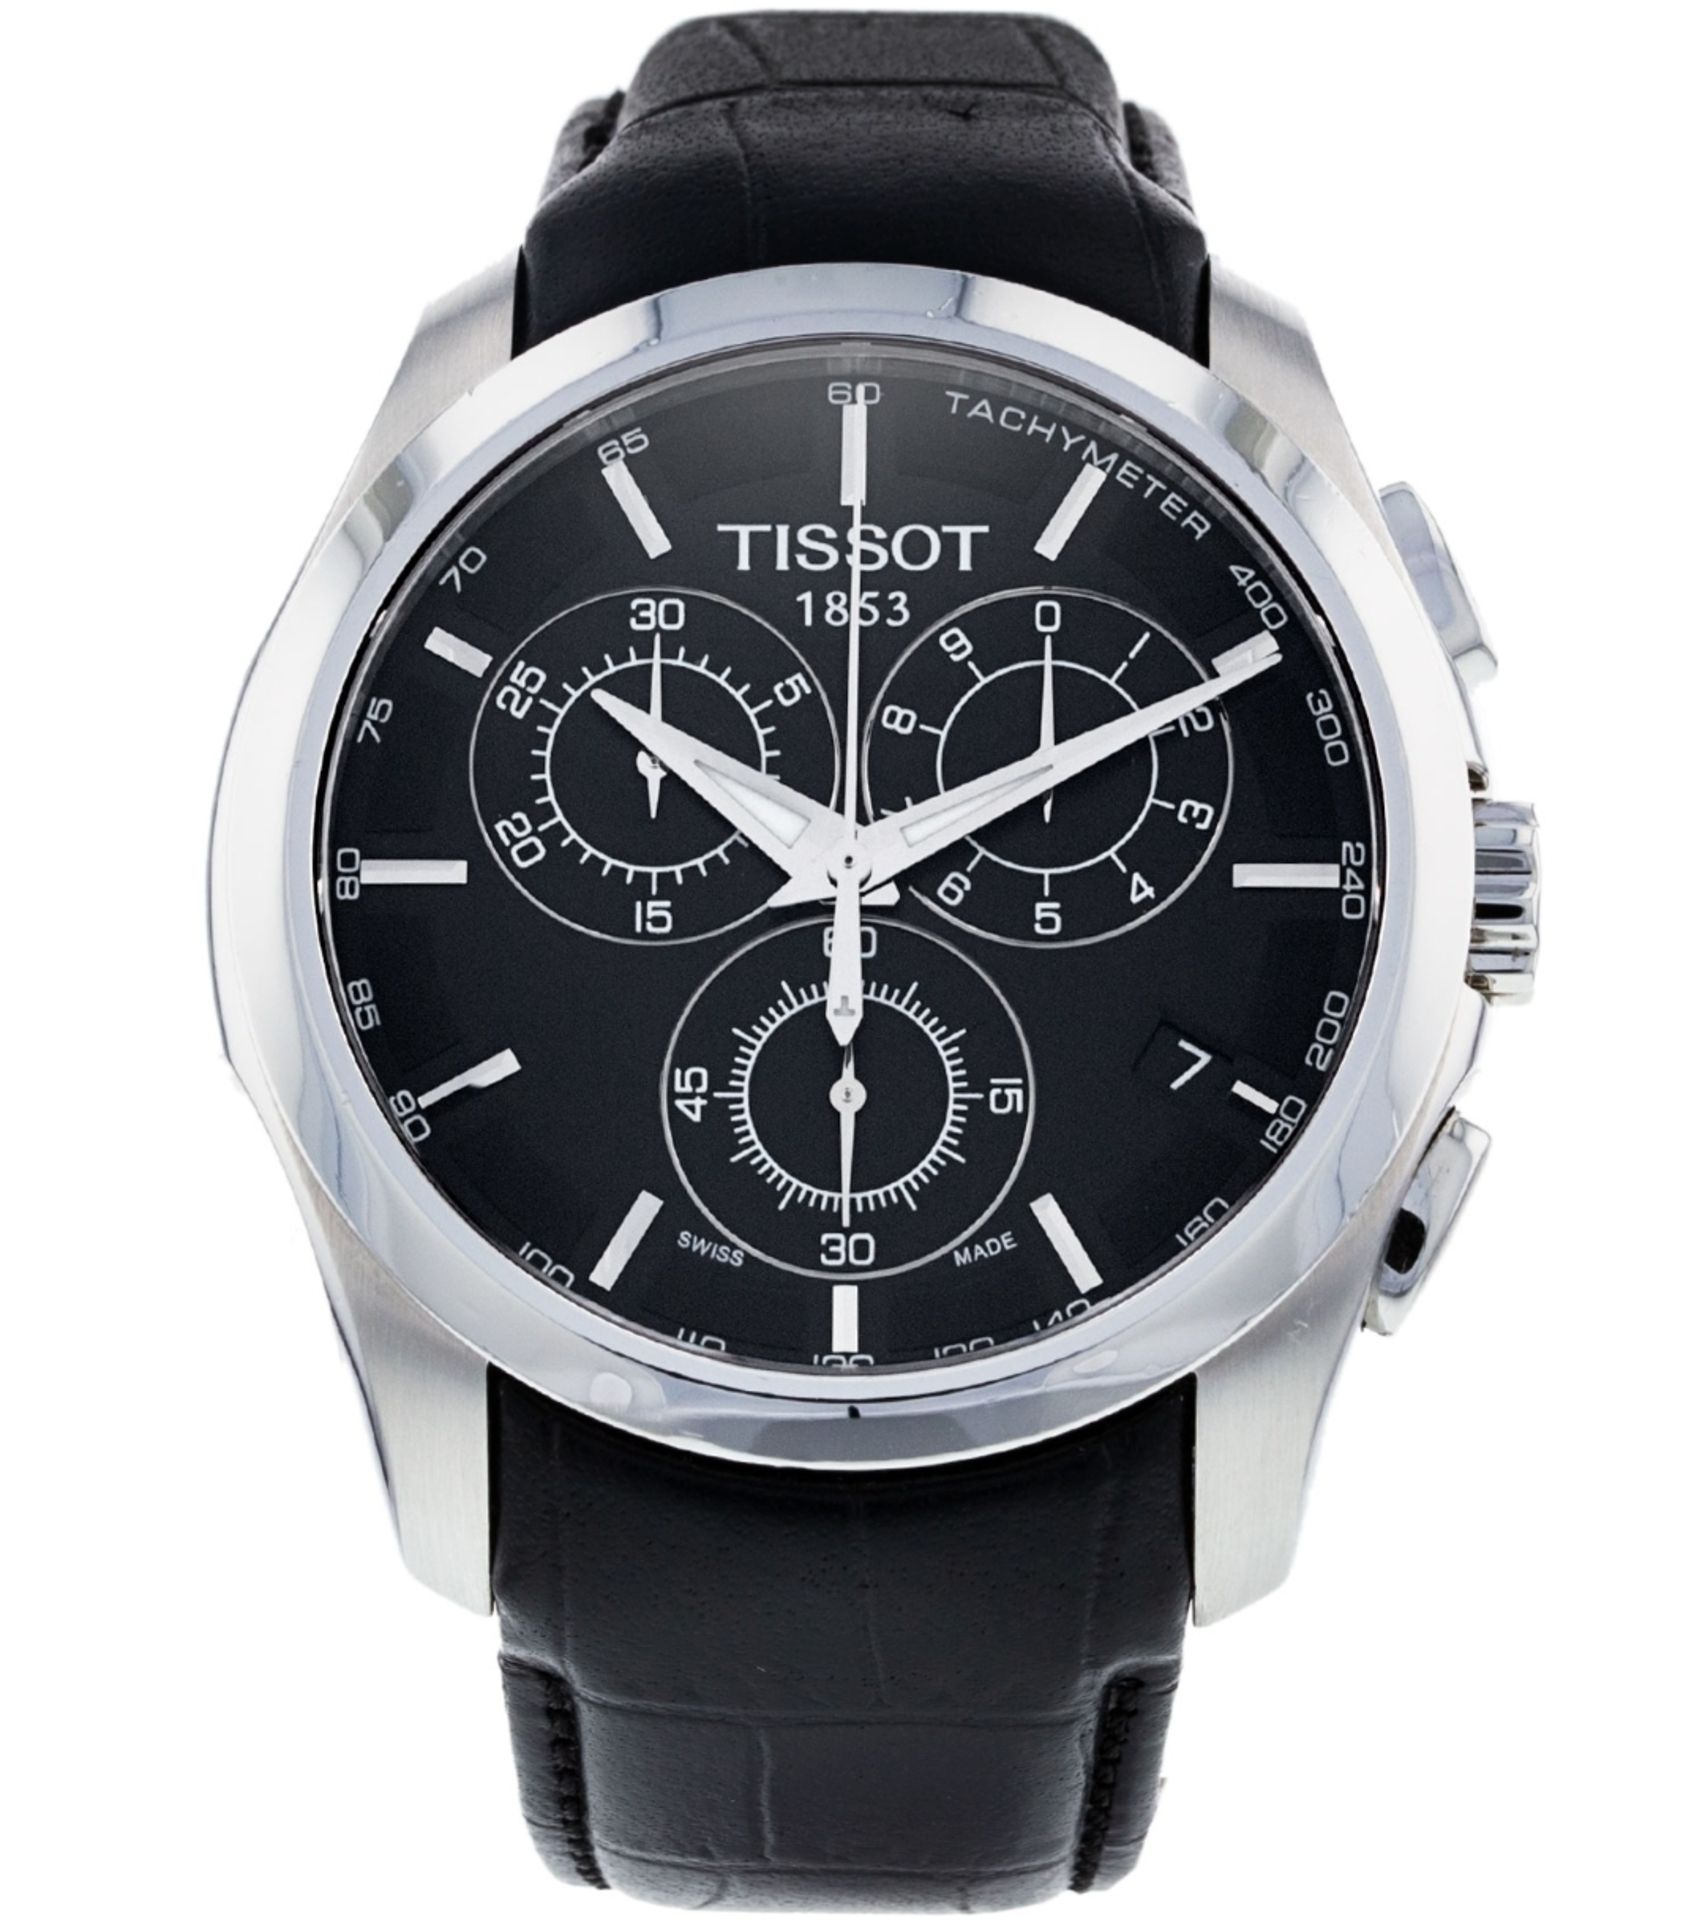 Tissot T-Trend Couturier T035.617.16.051.00 Chronograph Watch For Men - Image 3 of 11